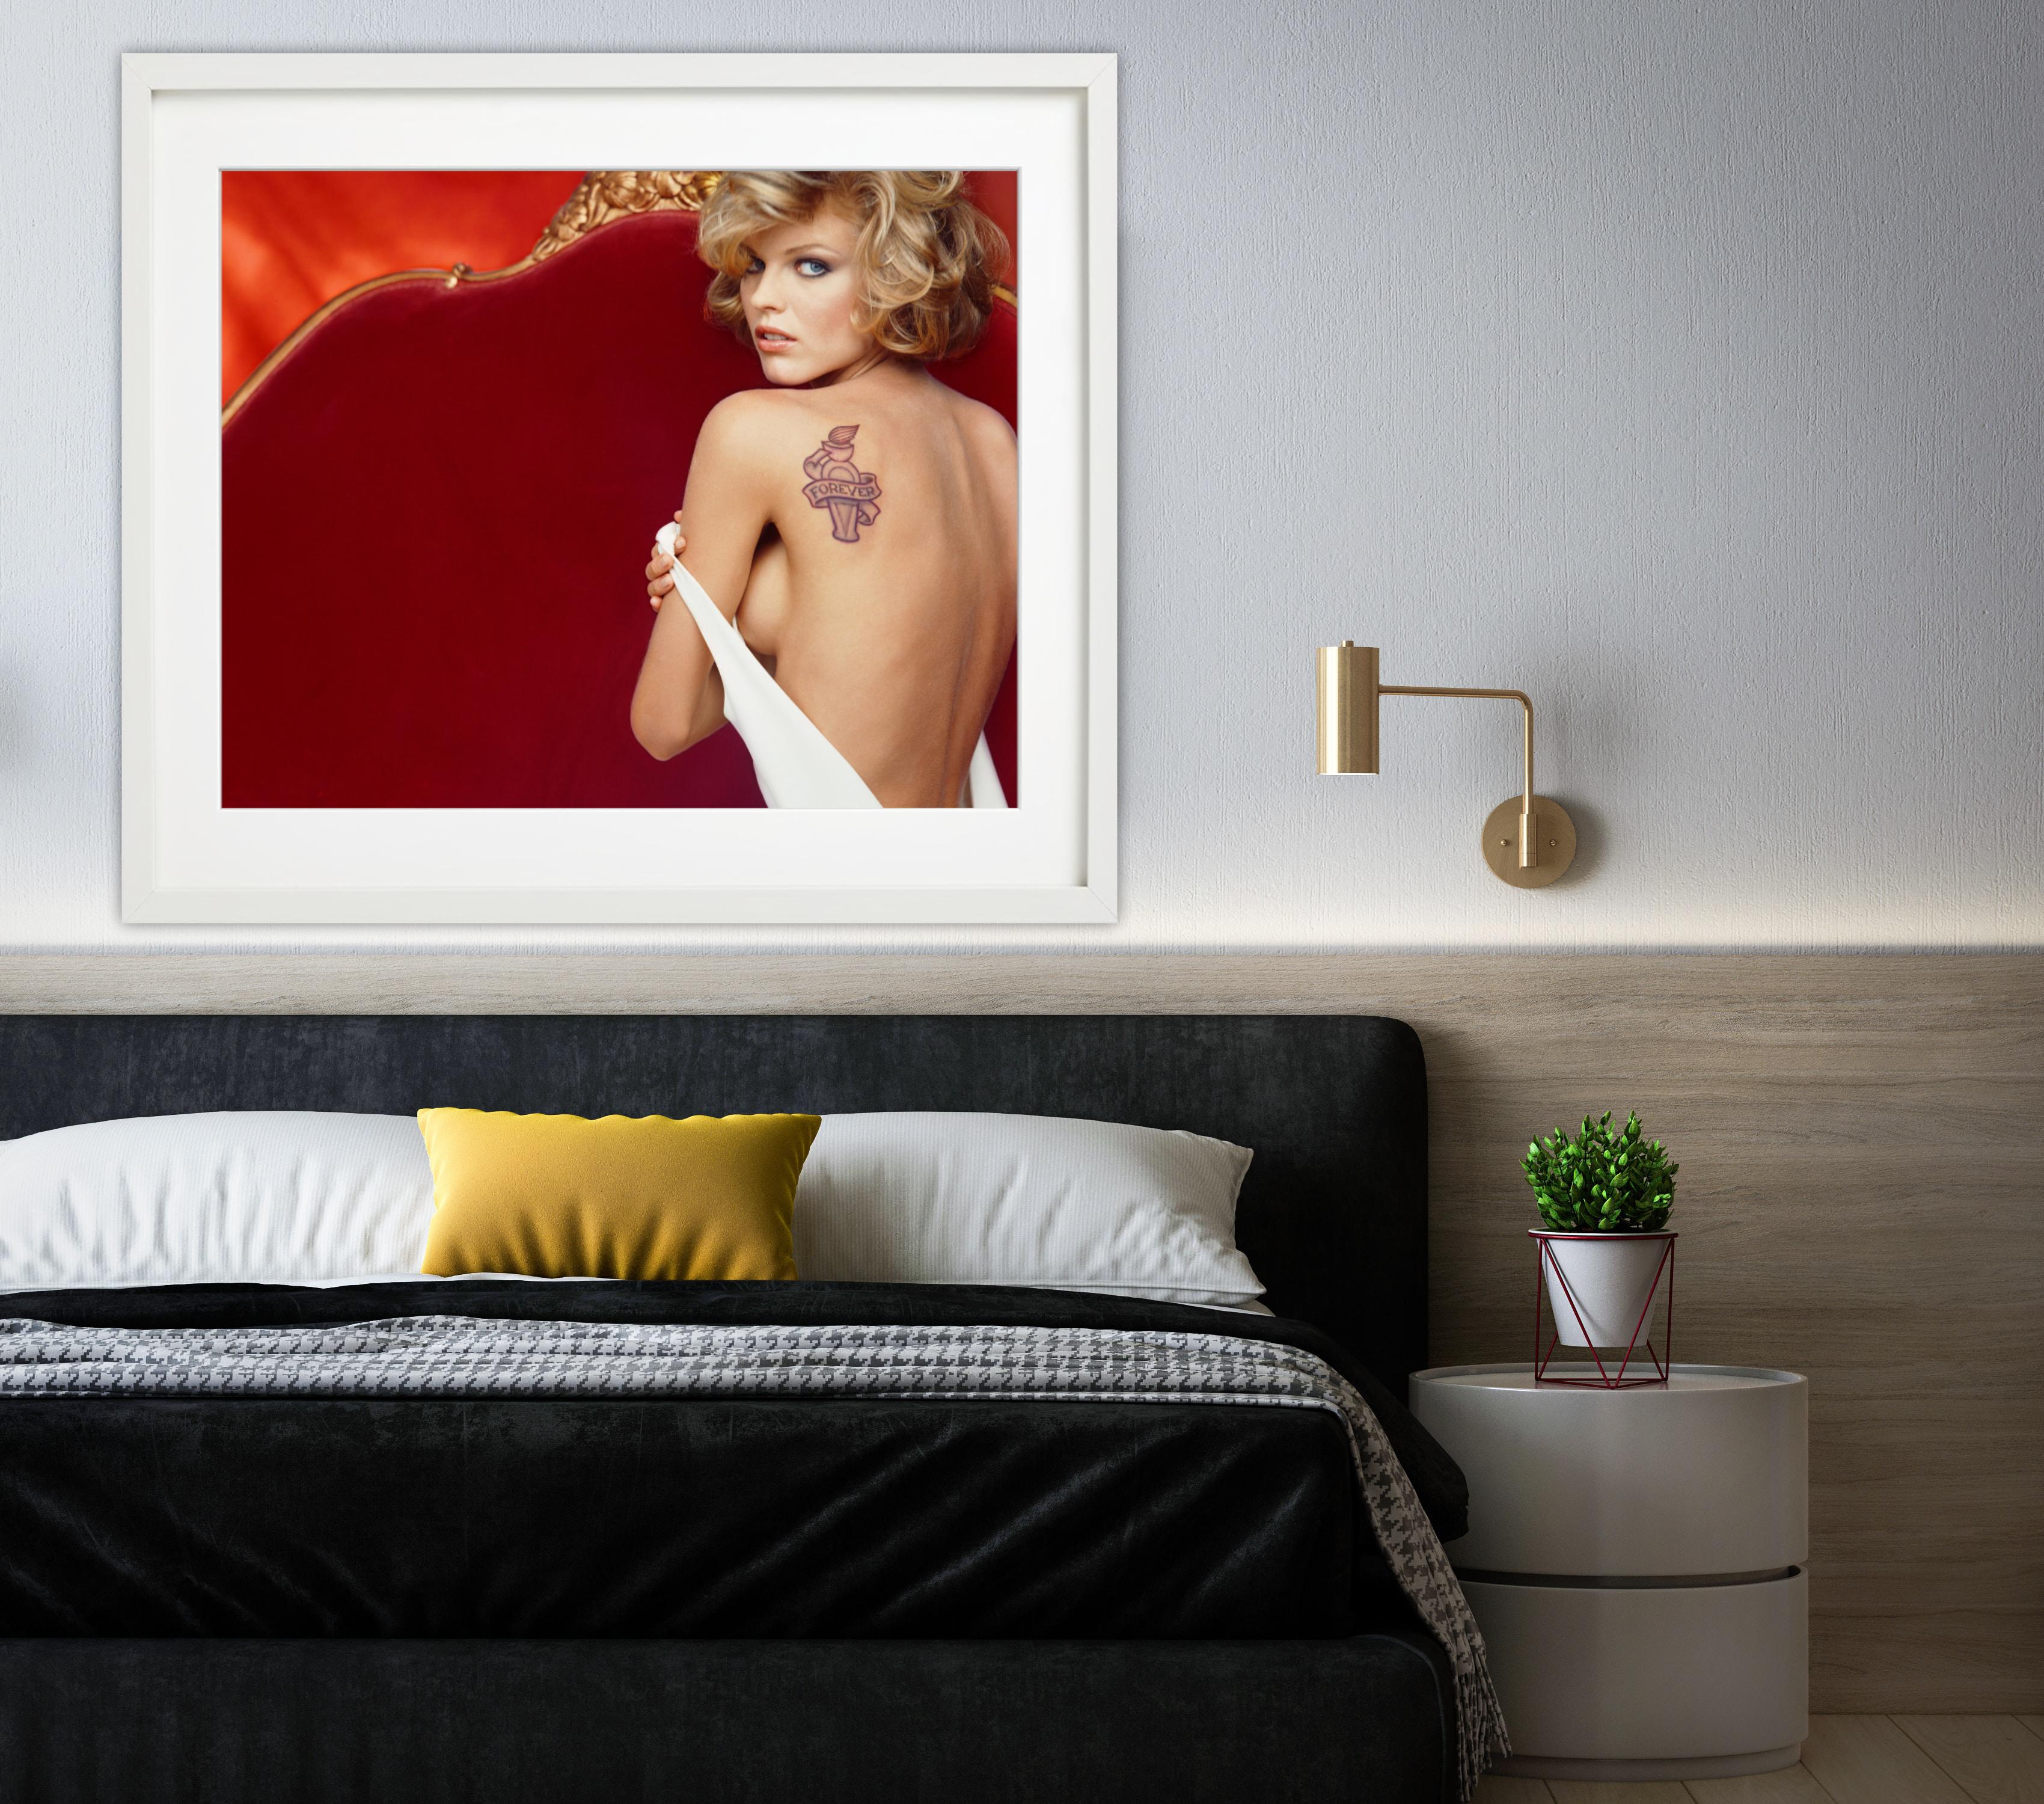 Portrait of supermodel Eva Herzigova on sofa, showing her nude back with tattoo - Red Portrait Photograph by Michel Comte